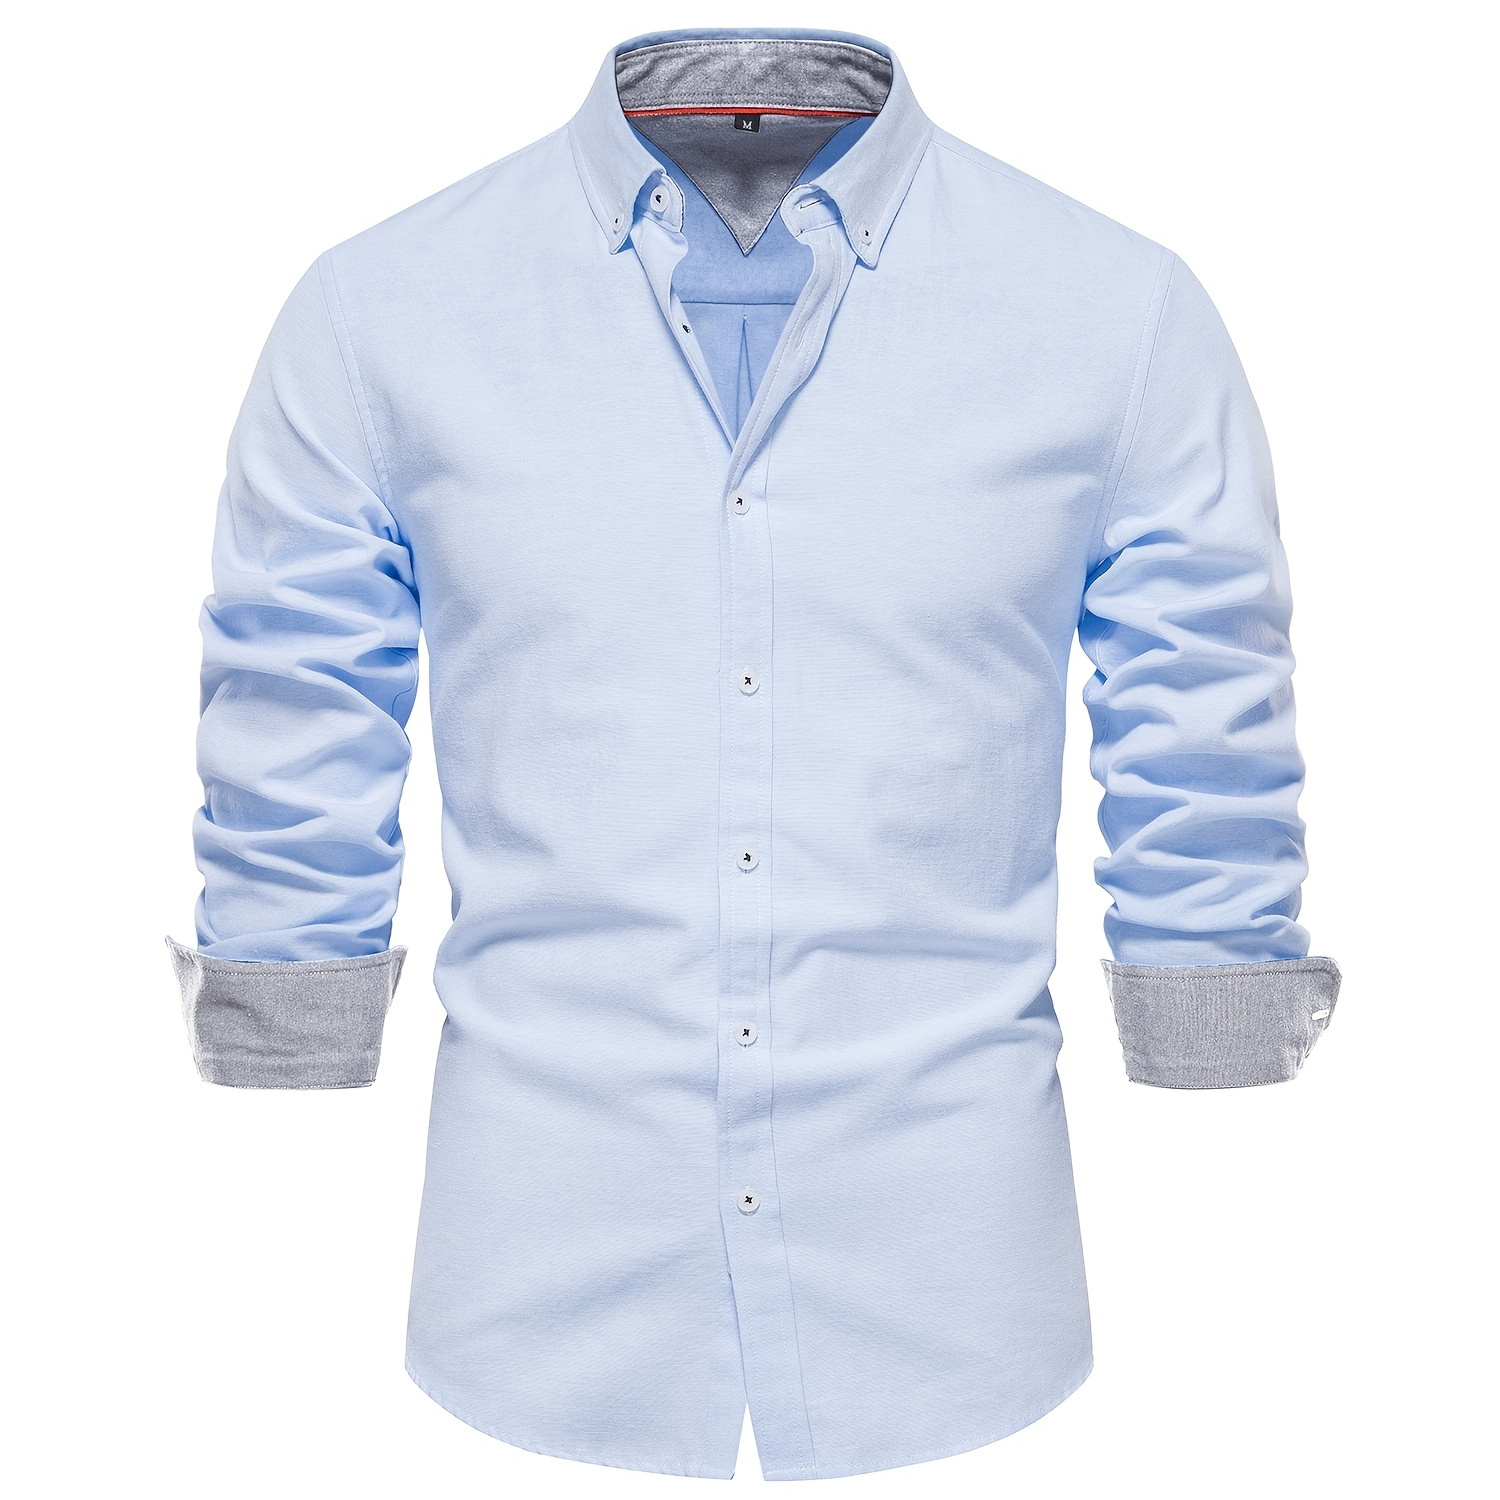 

Casual Solid Men's Long Sleeve Oxford Shirt, Men's Comfy Button Up Shirt For Spring Fall Outdoor